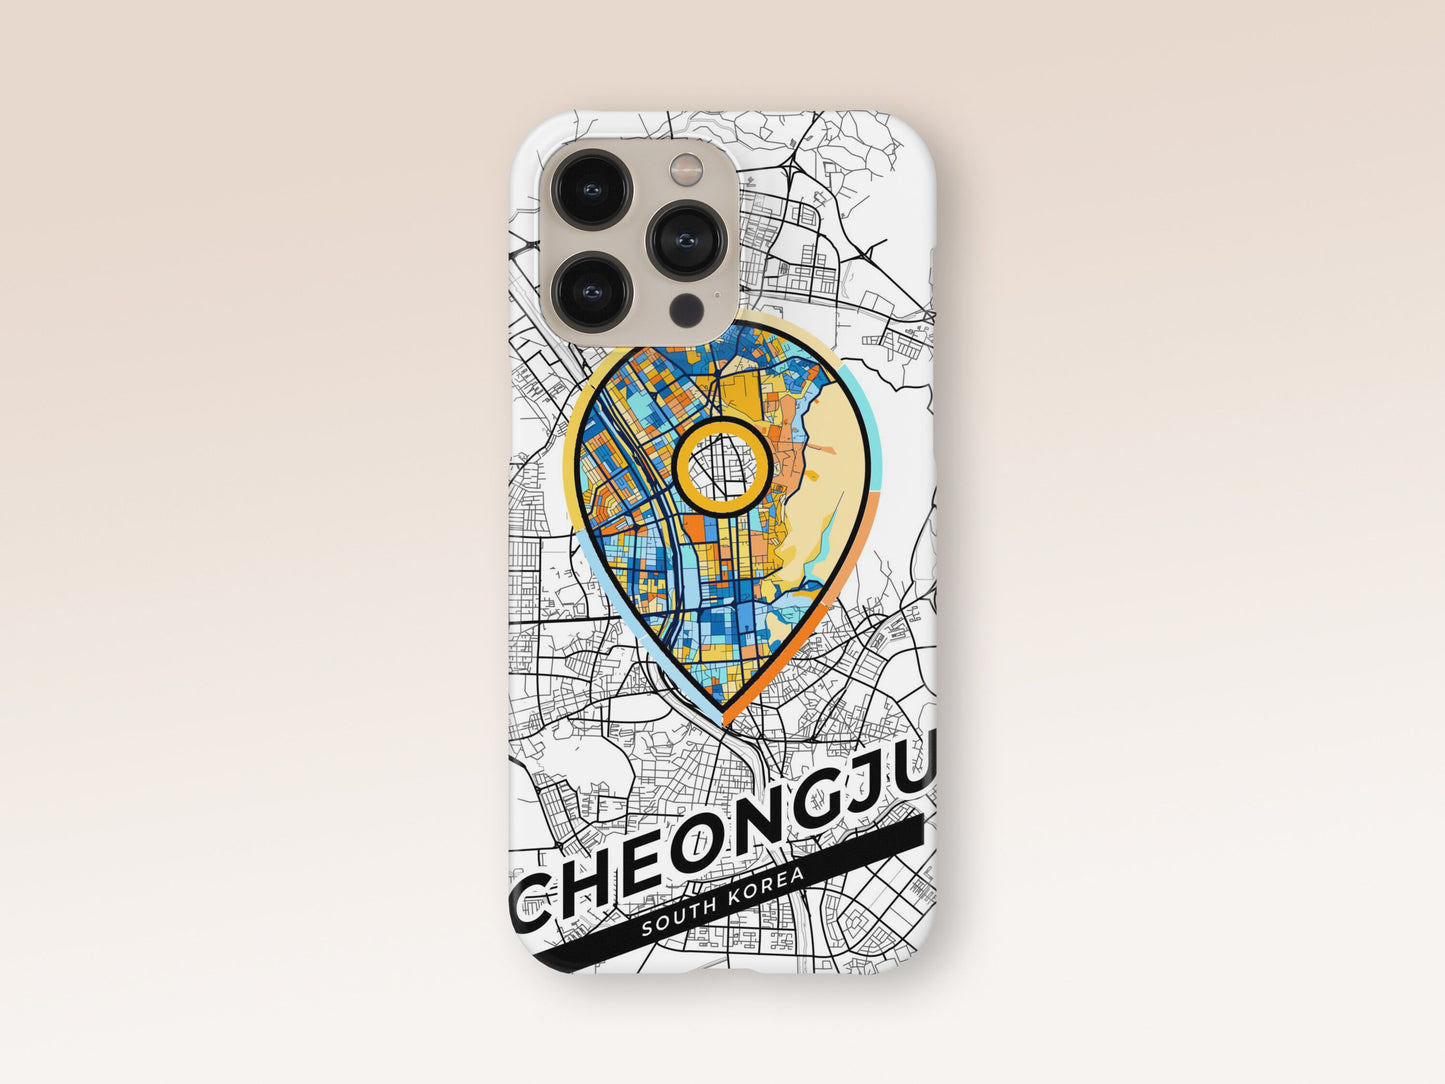 Cheongju South Korea slim phone case with colorful icon. Birthday, wedding or housewarming gift. Couple match cases. 1